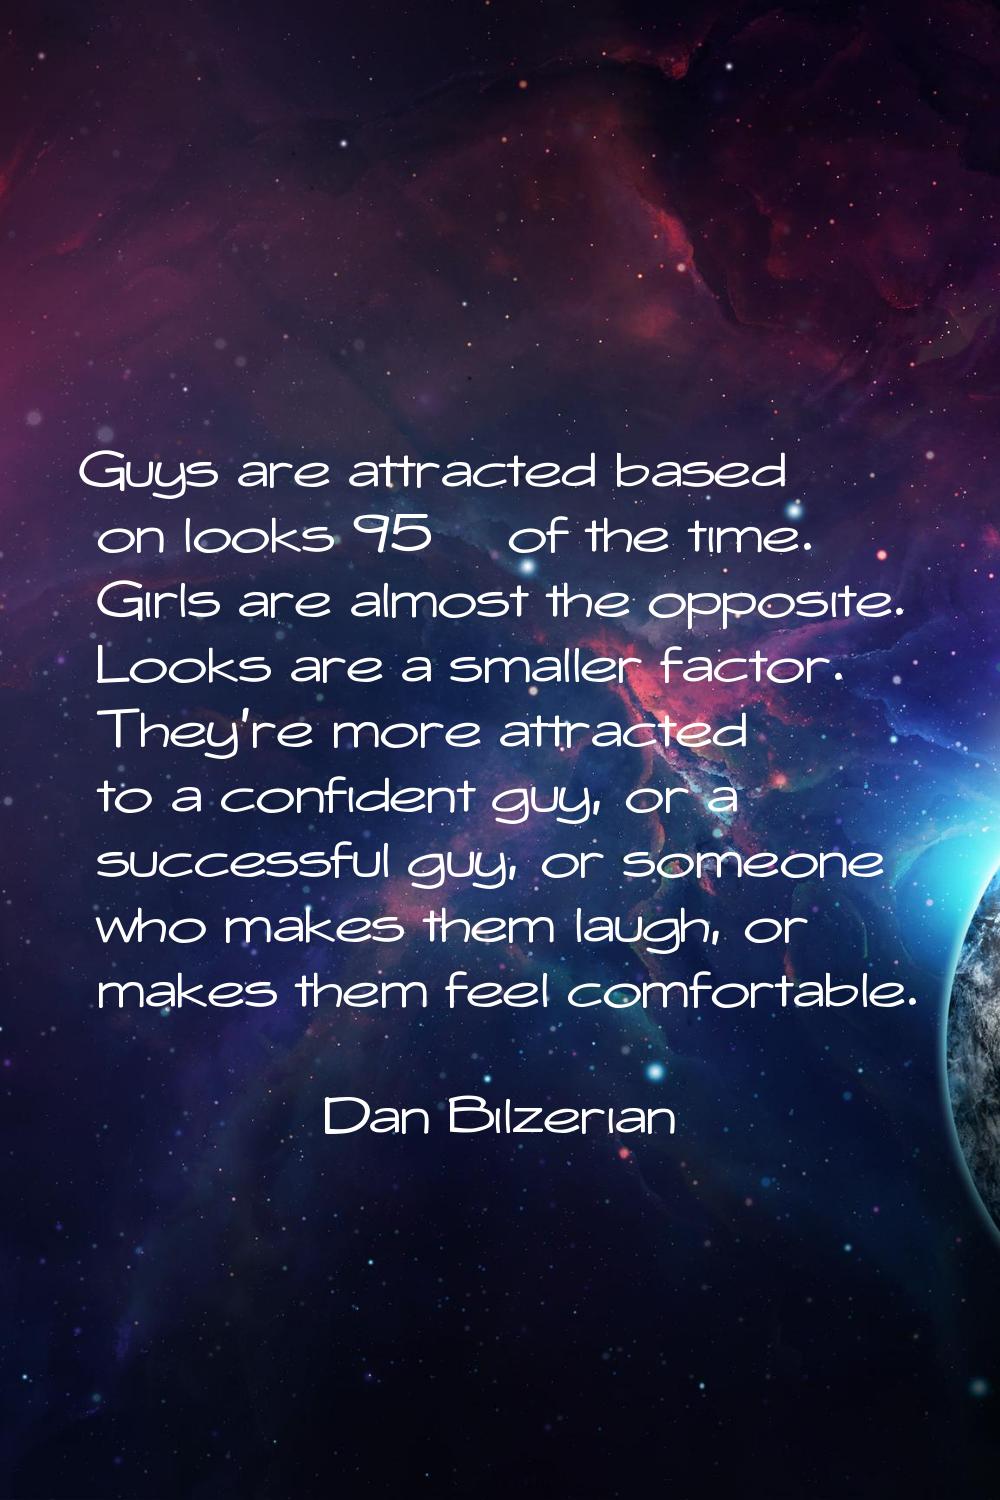 Guys are attracted based on looks 95% of the time. Girls are almost the opposite. Looks are a small